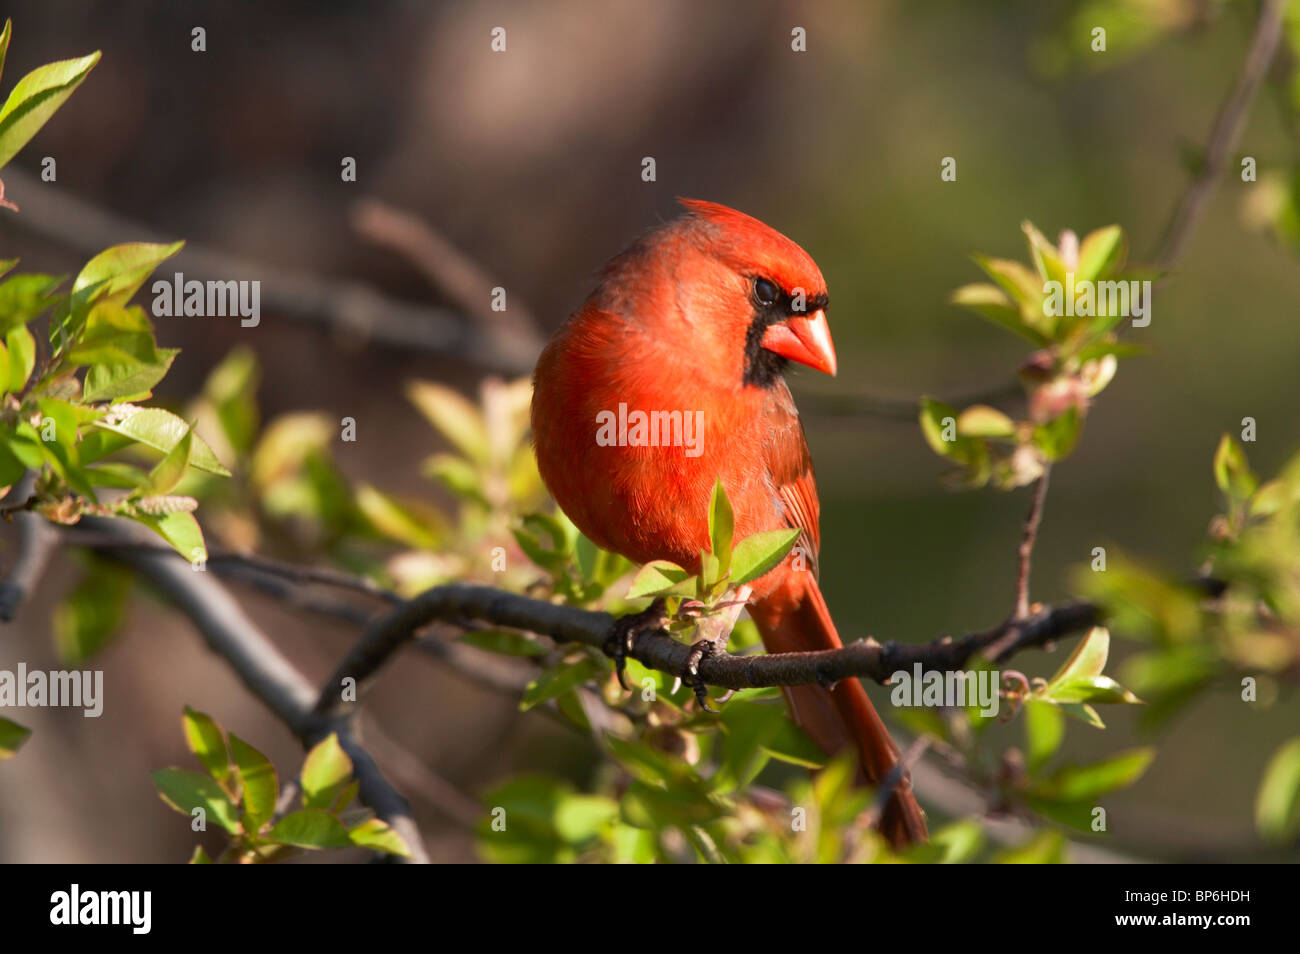 Adult Male Northern Cardinal Perched on a Branch Stock Photo